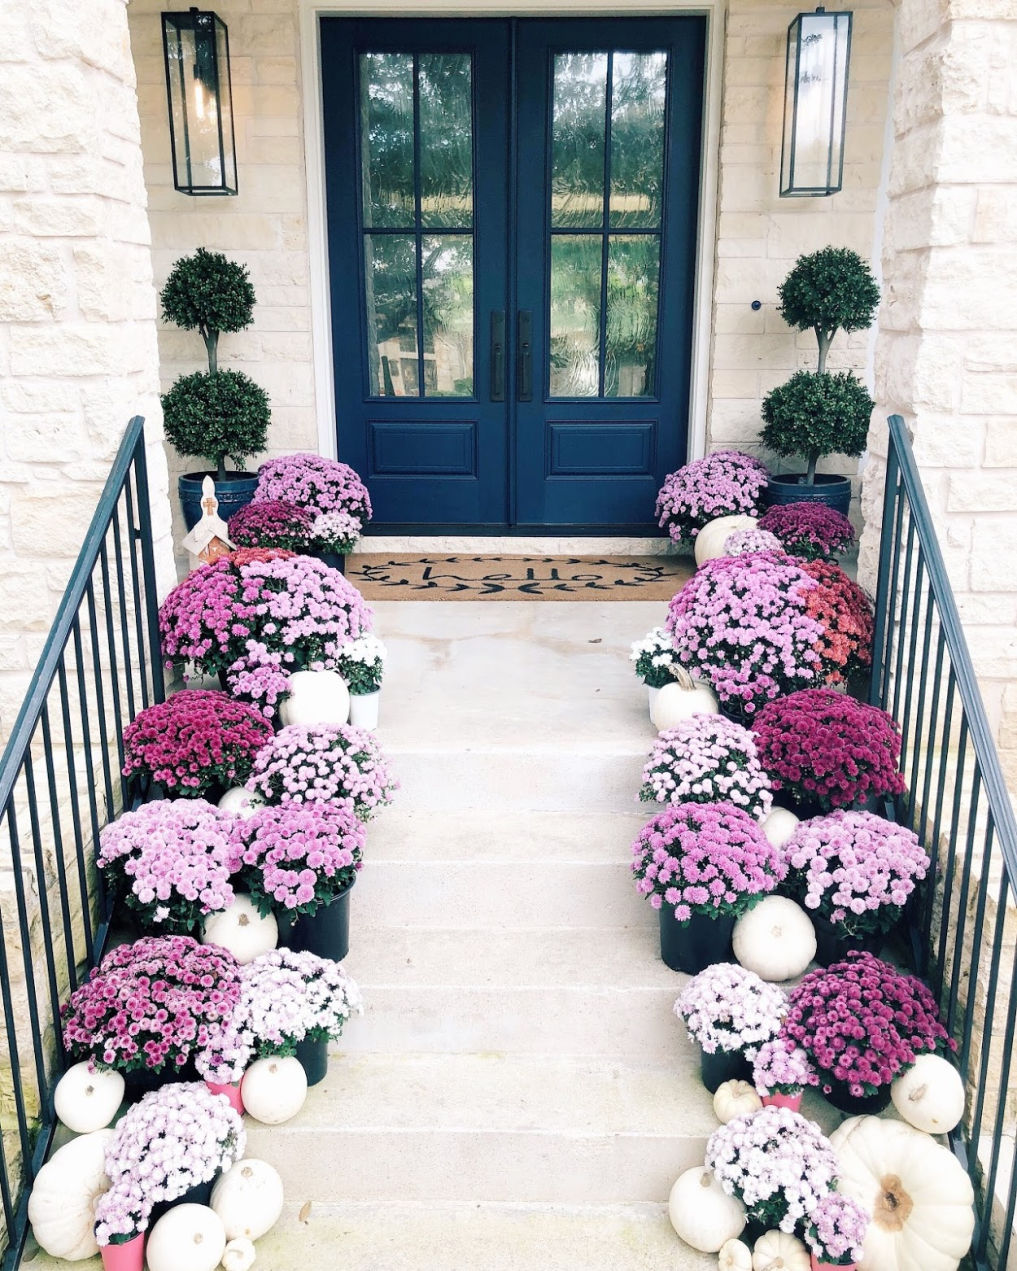 Beautiful fall front porch with purple mums kellyelko.com See more at Extra! Extra! 2